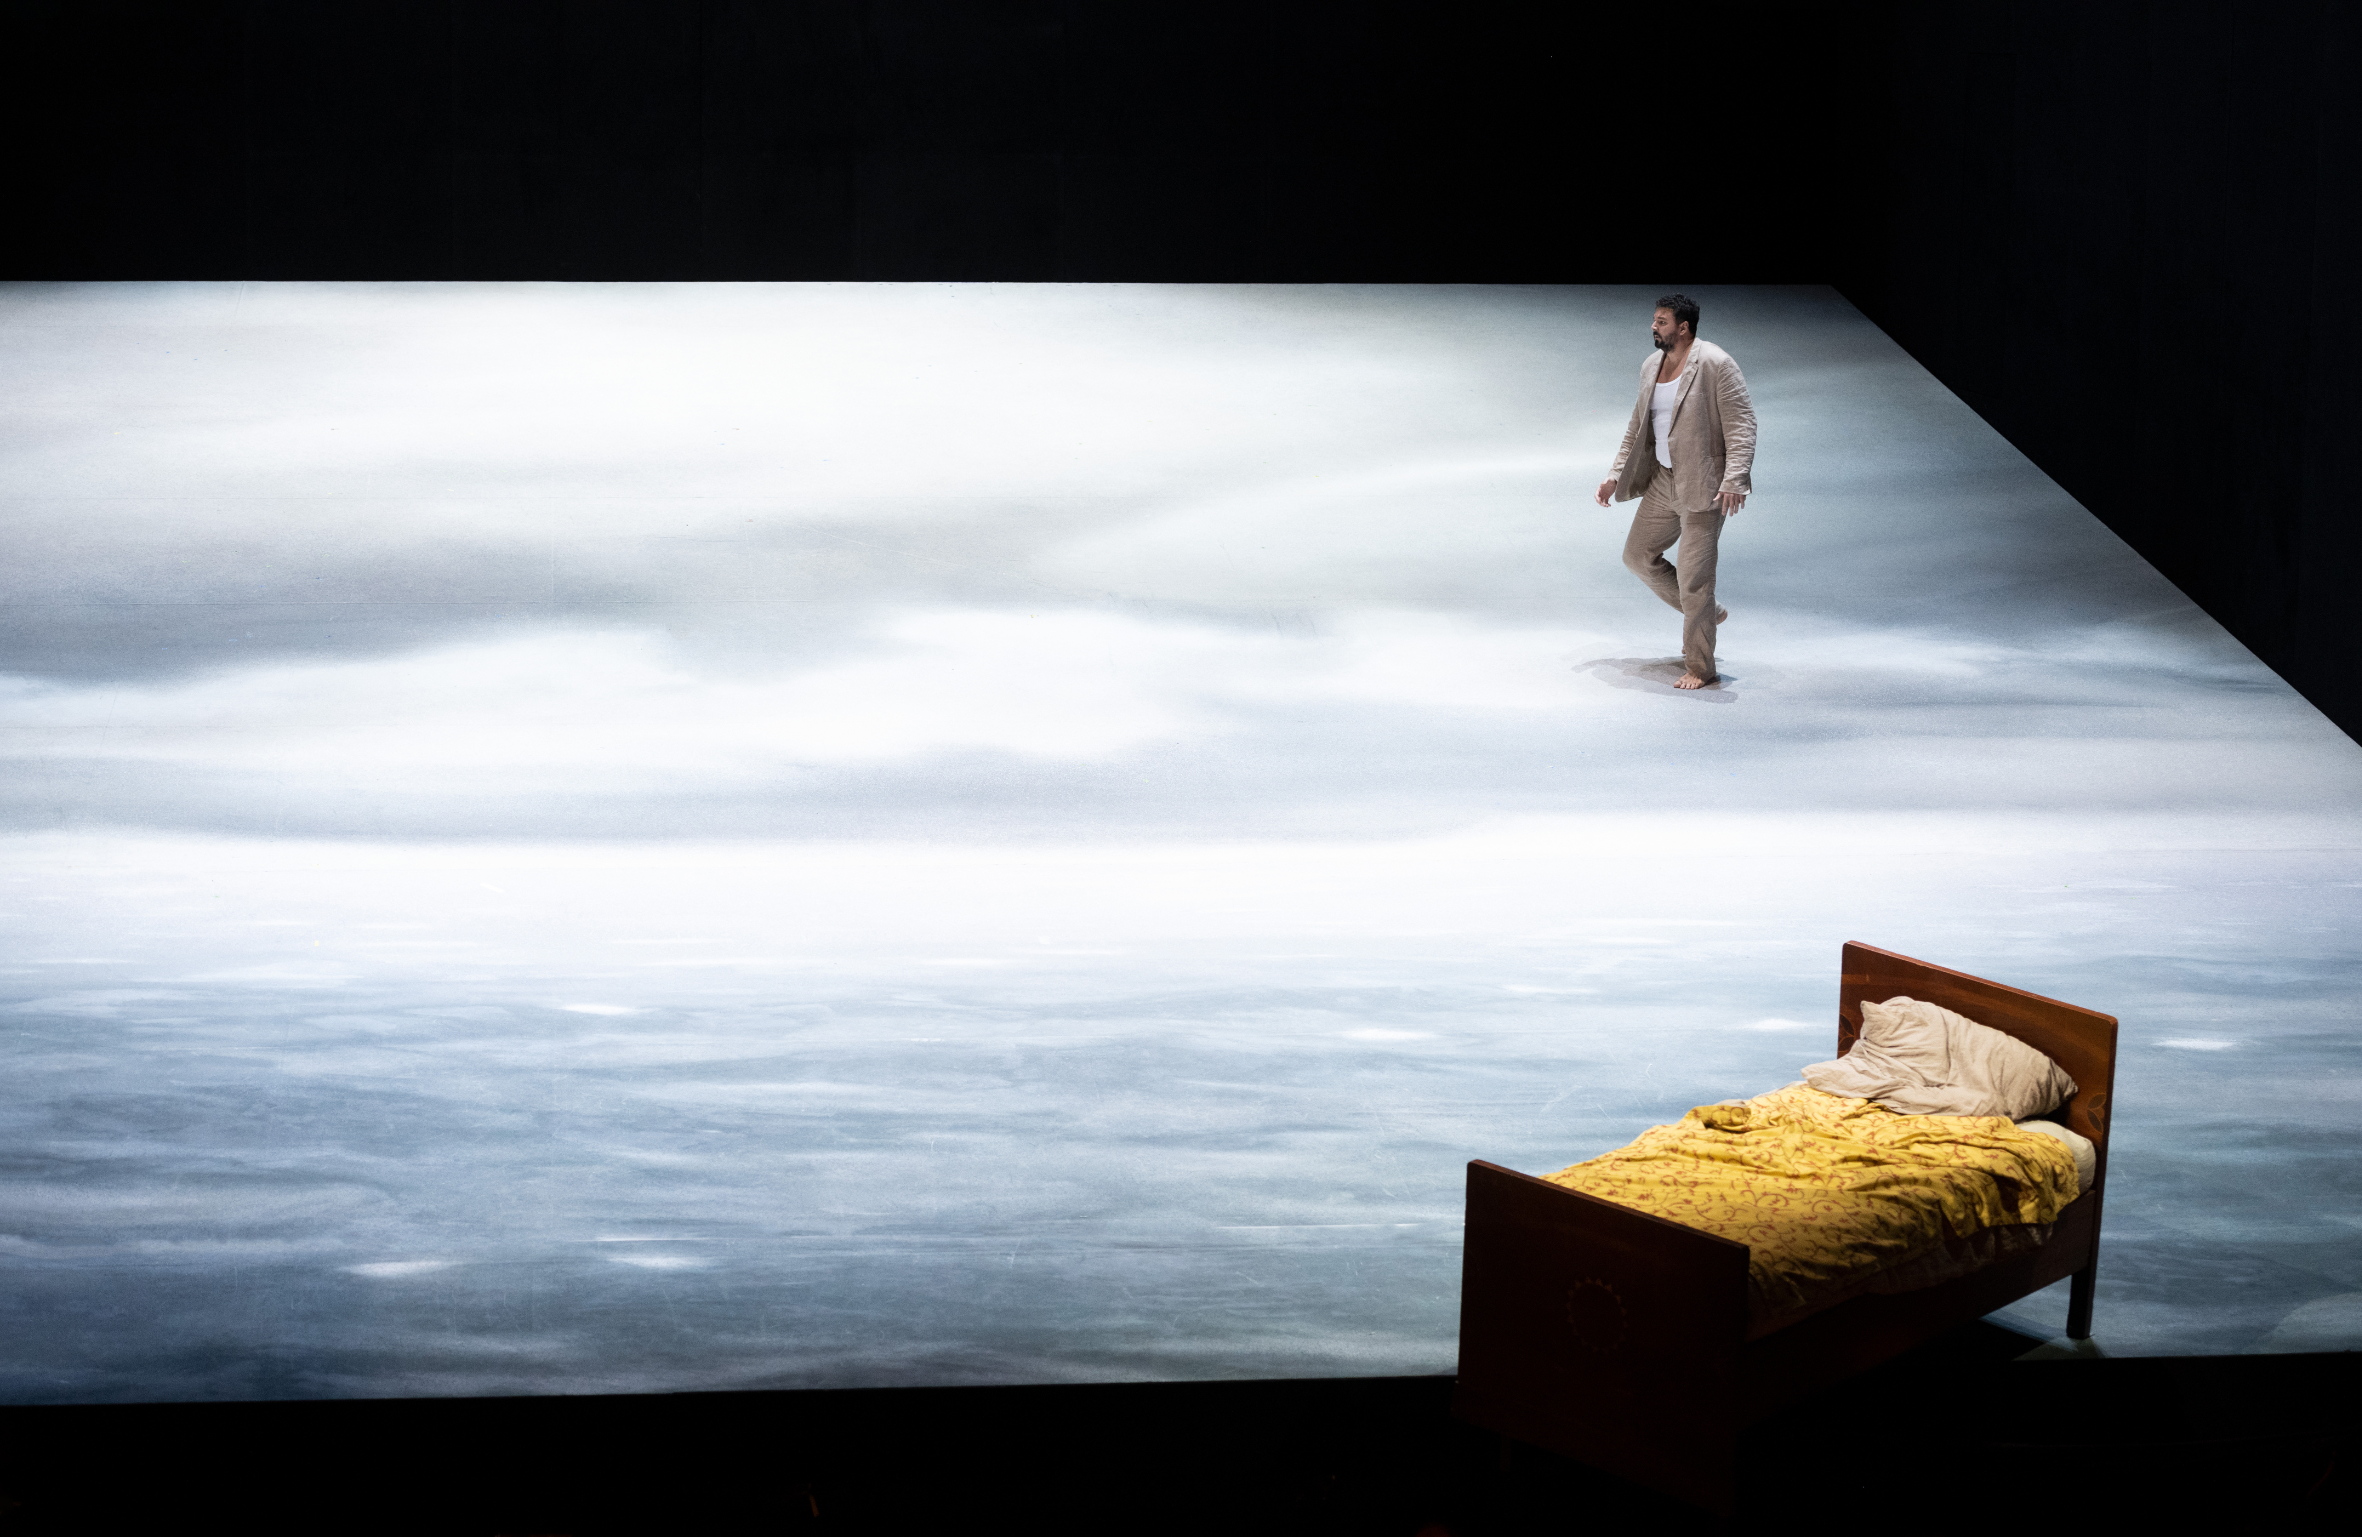 Peter Grimes, Britten, Eric Cutler, Theatre an der Wien, staging, Christoph Loy, stage, performance, classical, opera, Wien, Osterreich, production